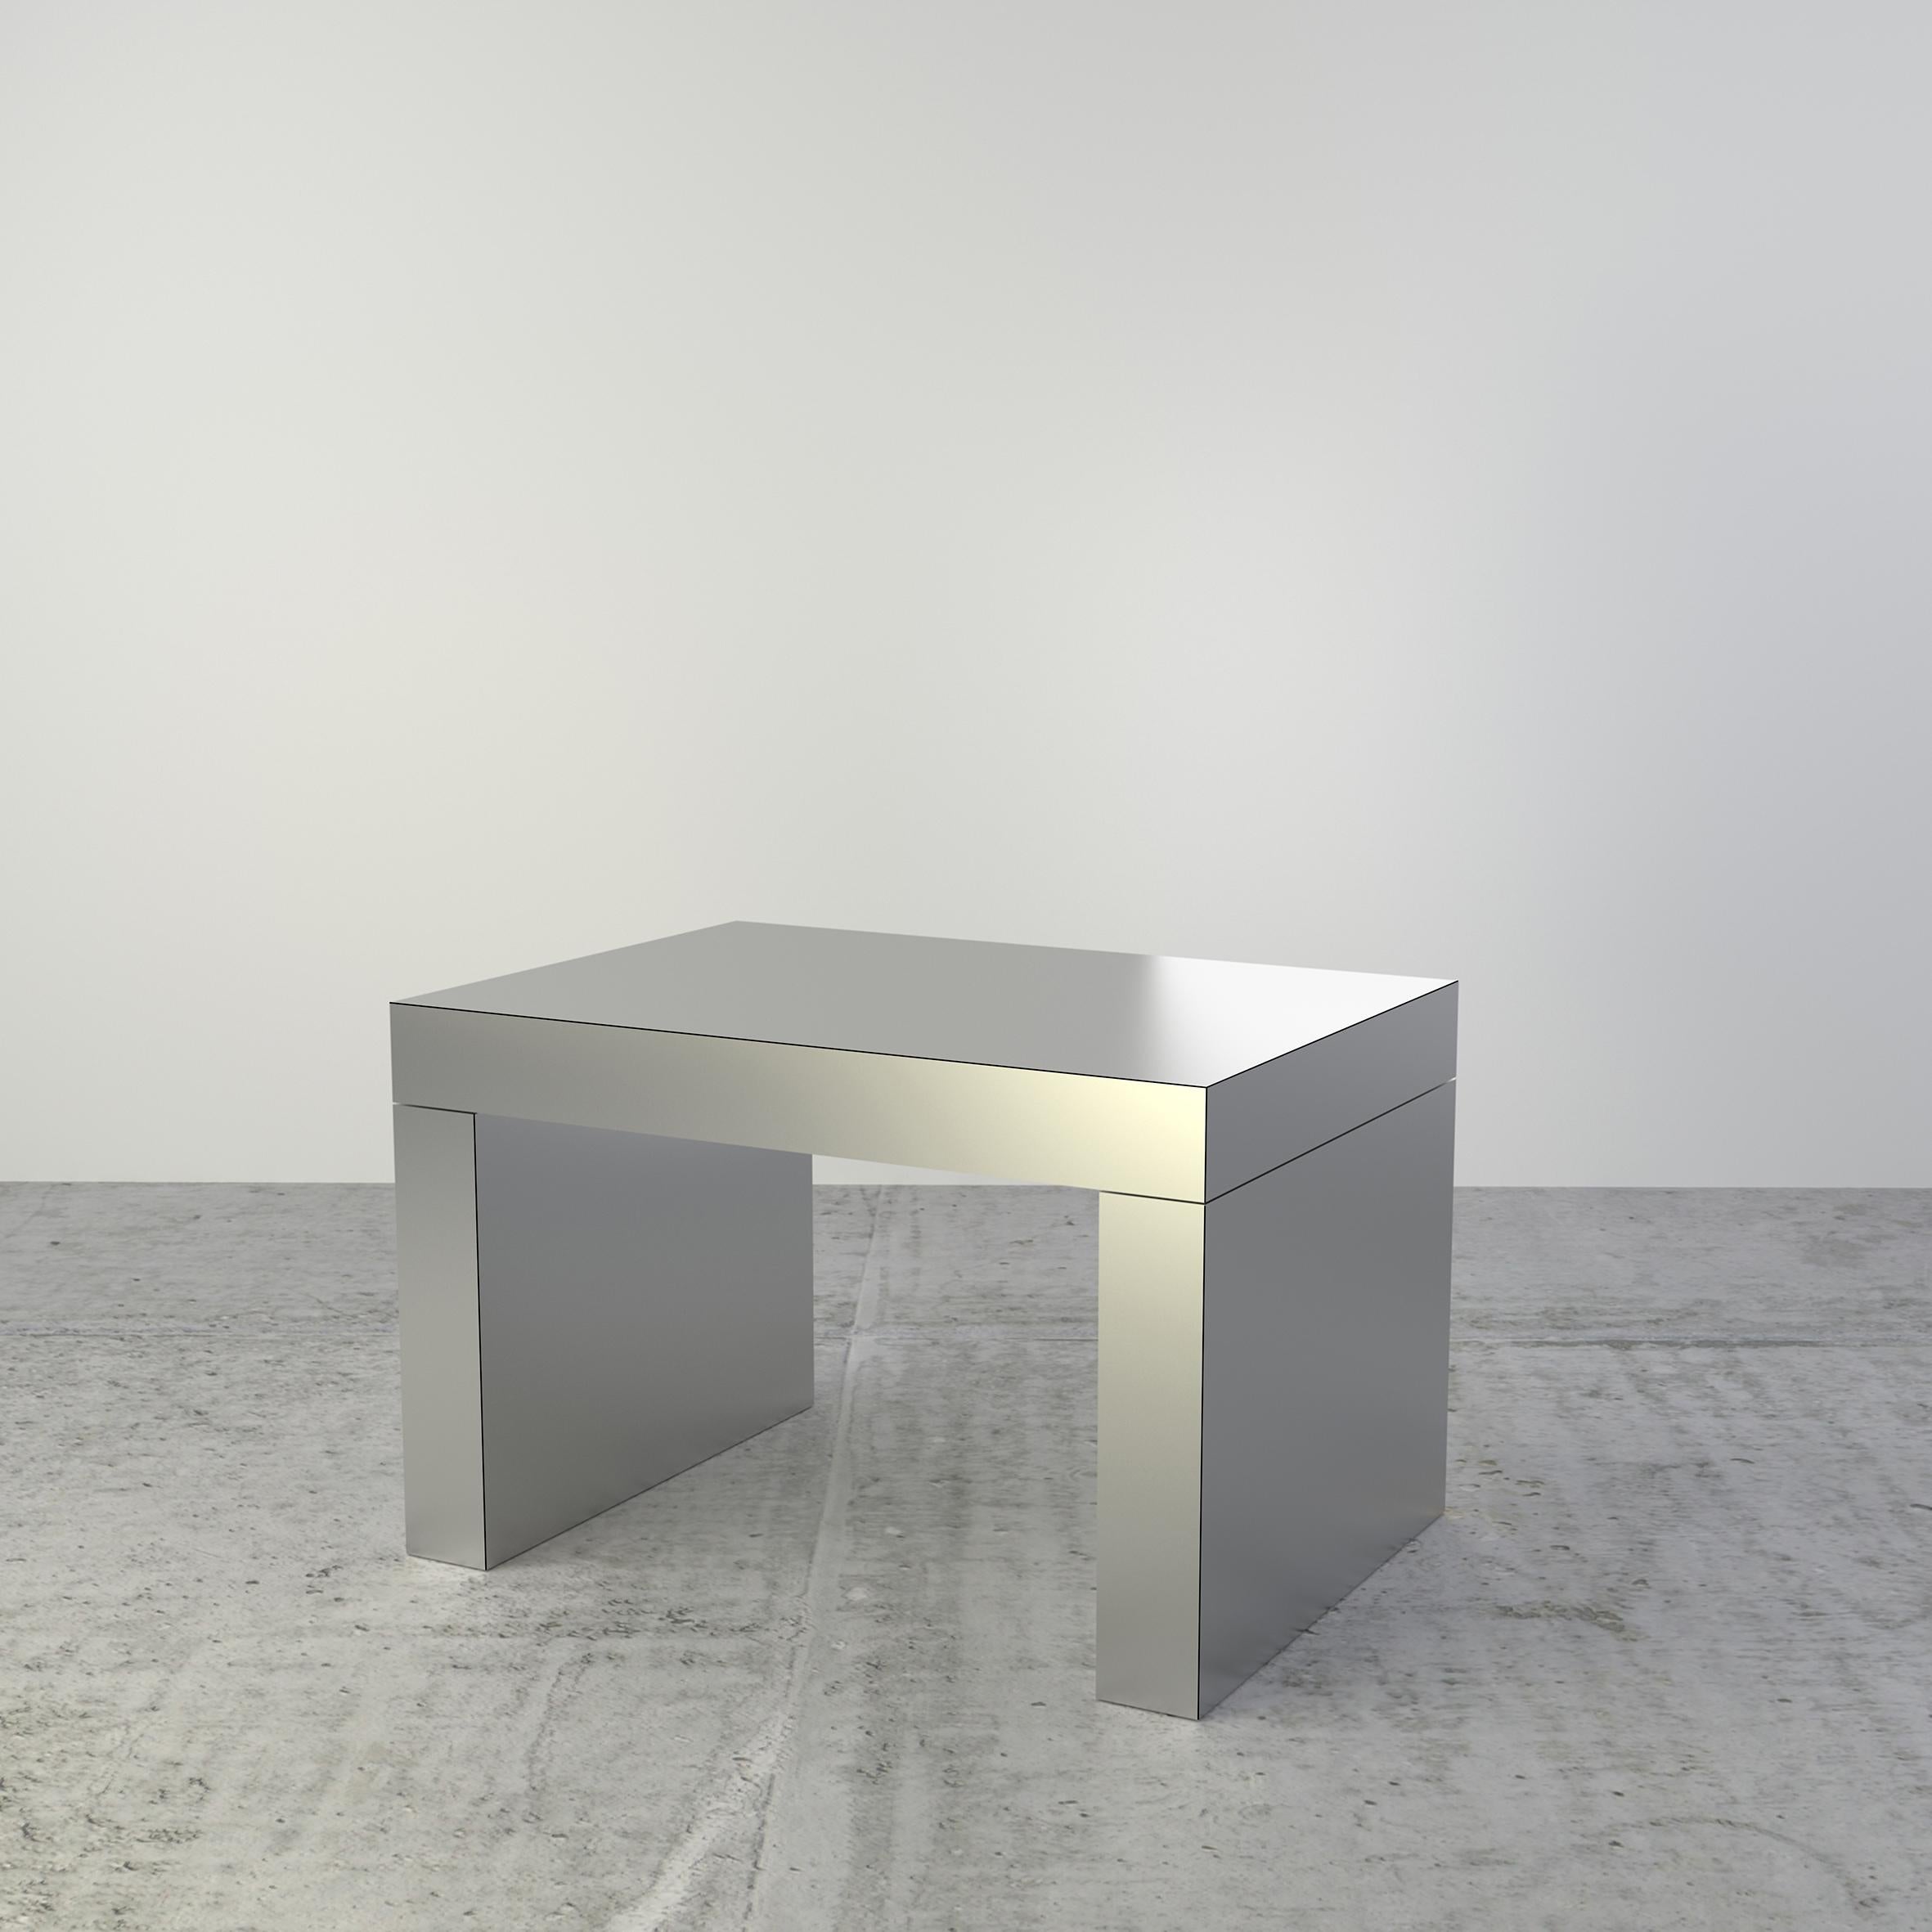 Gaby is a multifunctional coffee table entirely covered by HPL aluminum. The manufacturing process and research on metal surfaces treatment and finishing allows to highlight the shine and brightness of aluminum.